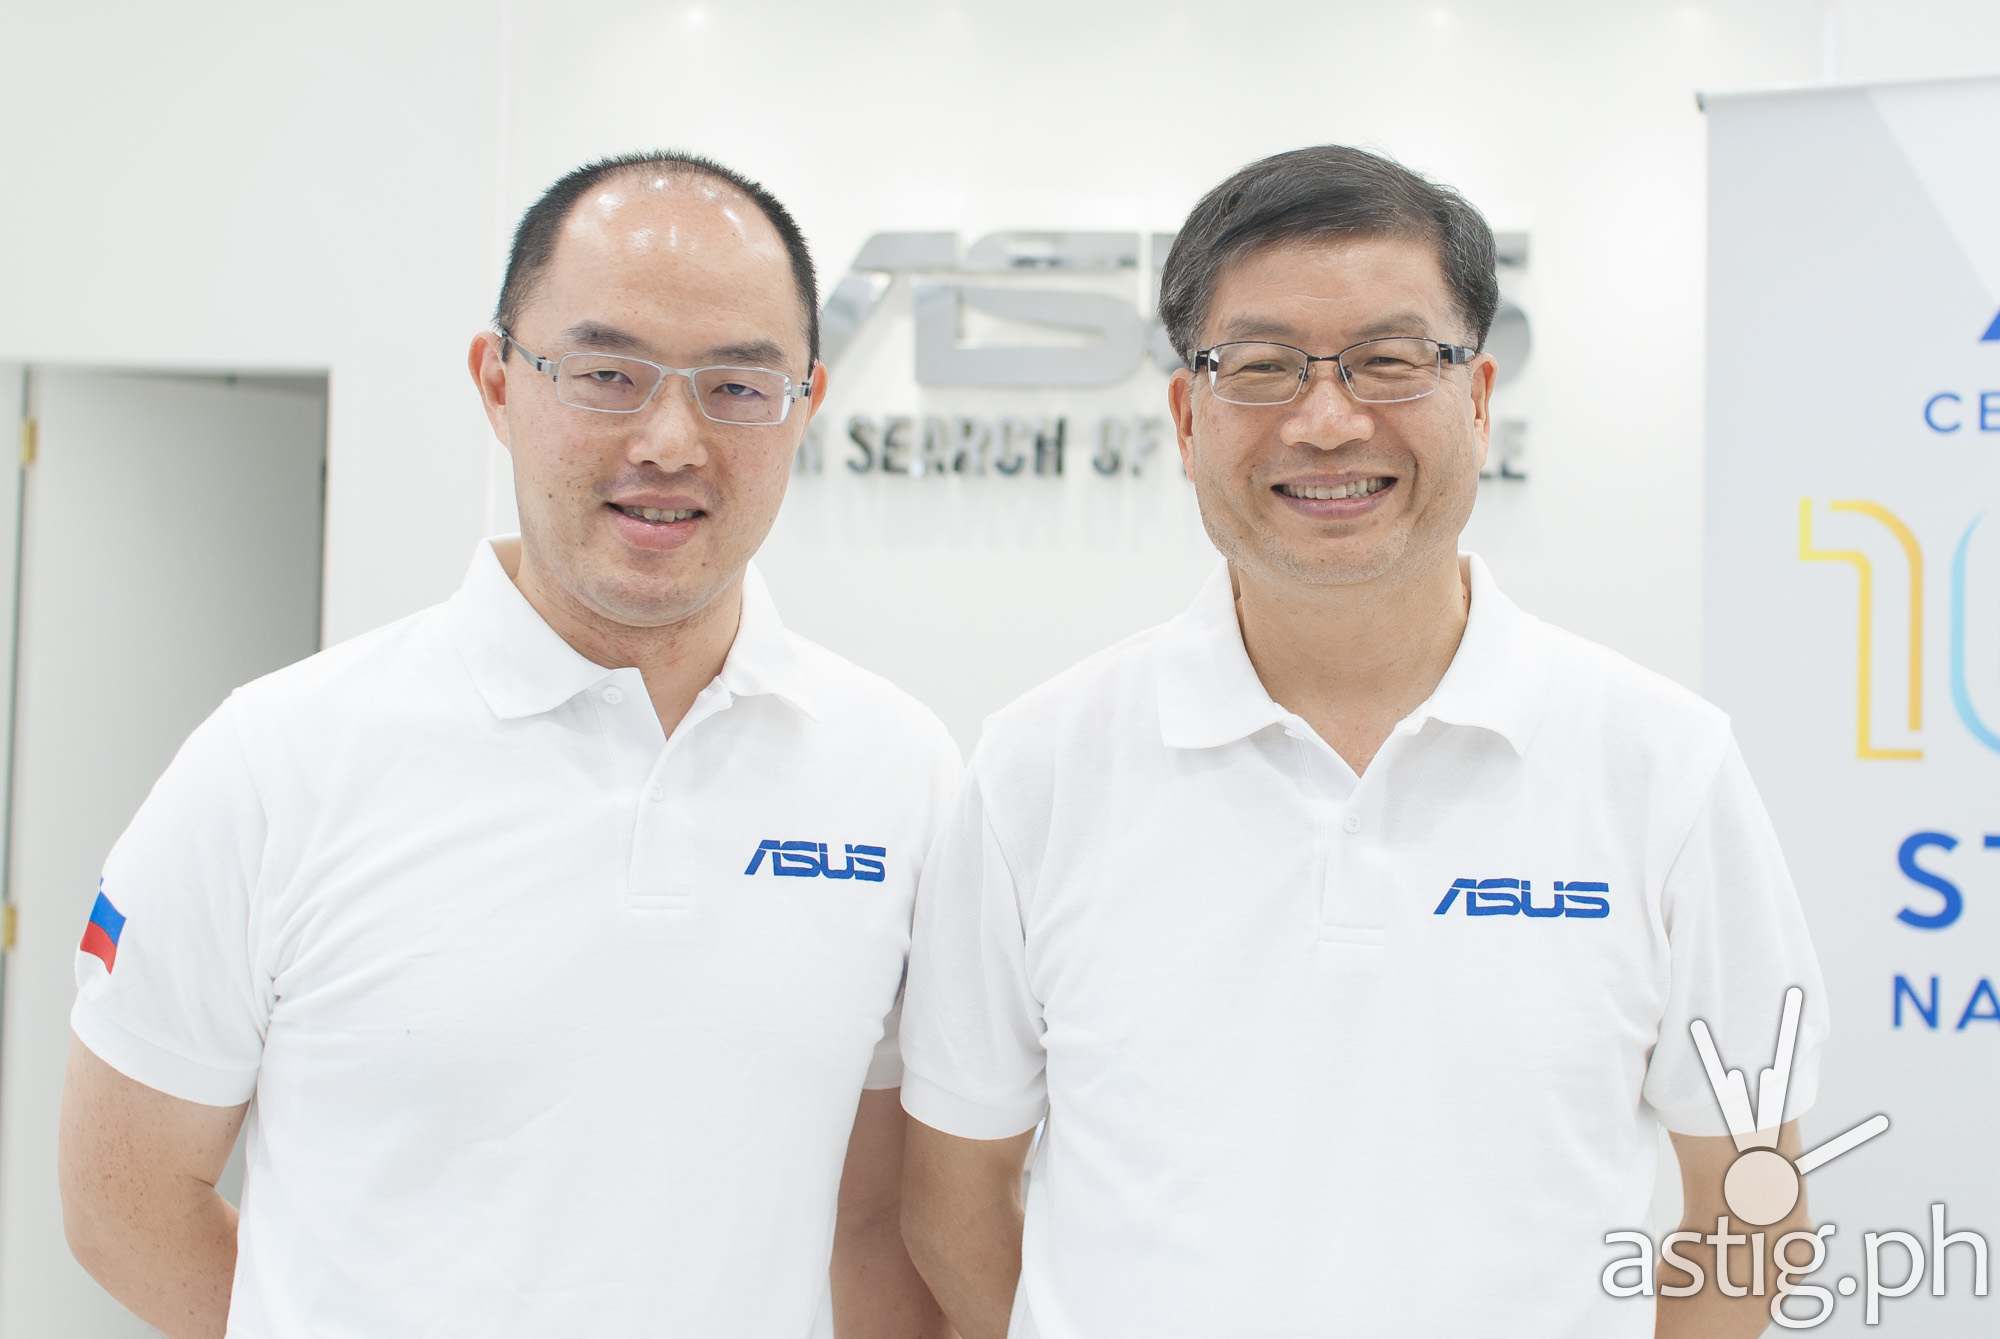 ASUS Philippines Country Manager George Su with ASUS Global CEO Jerry Shen